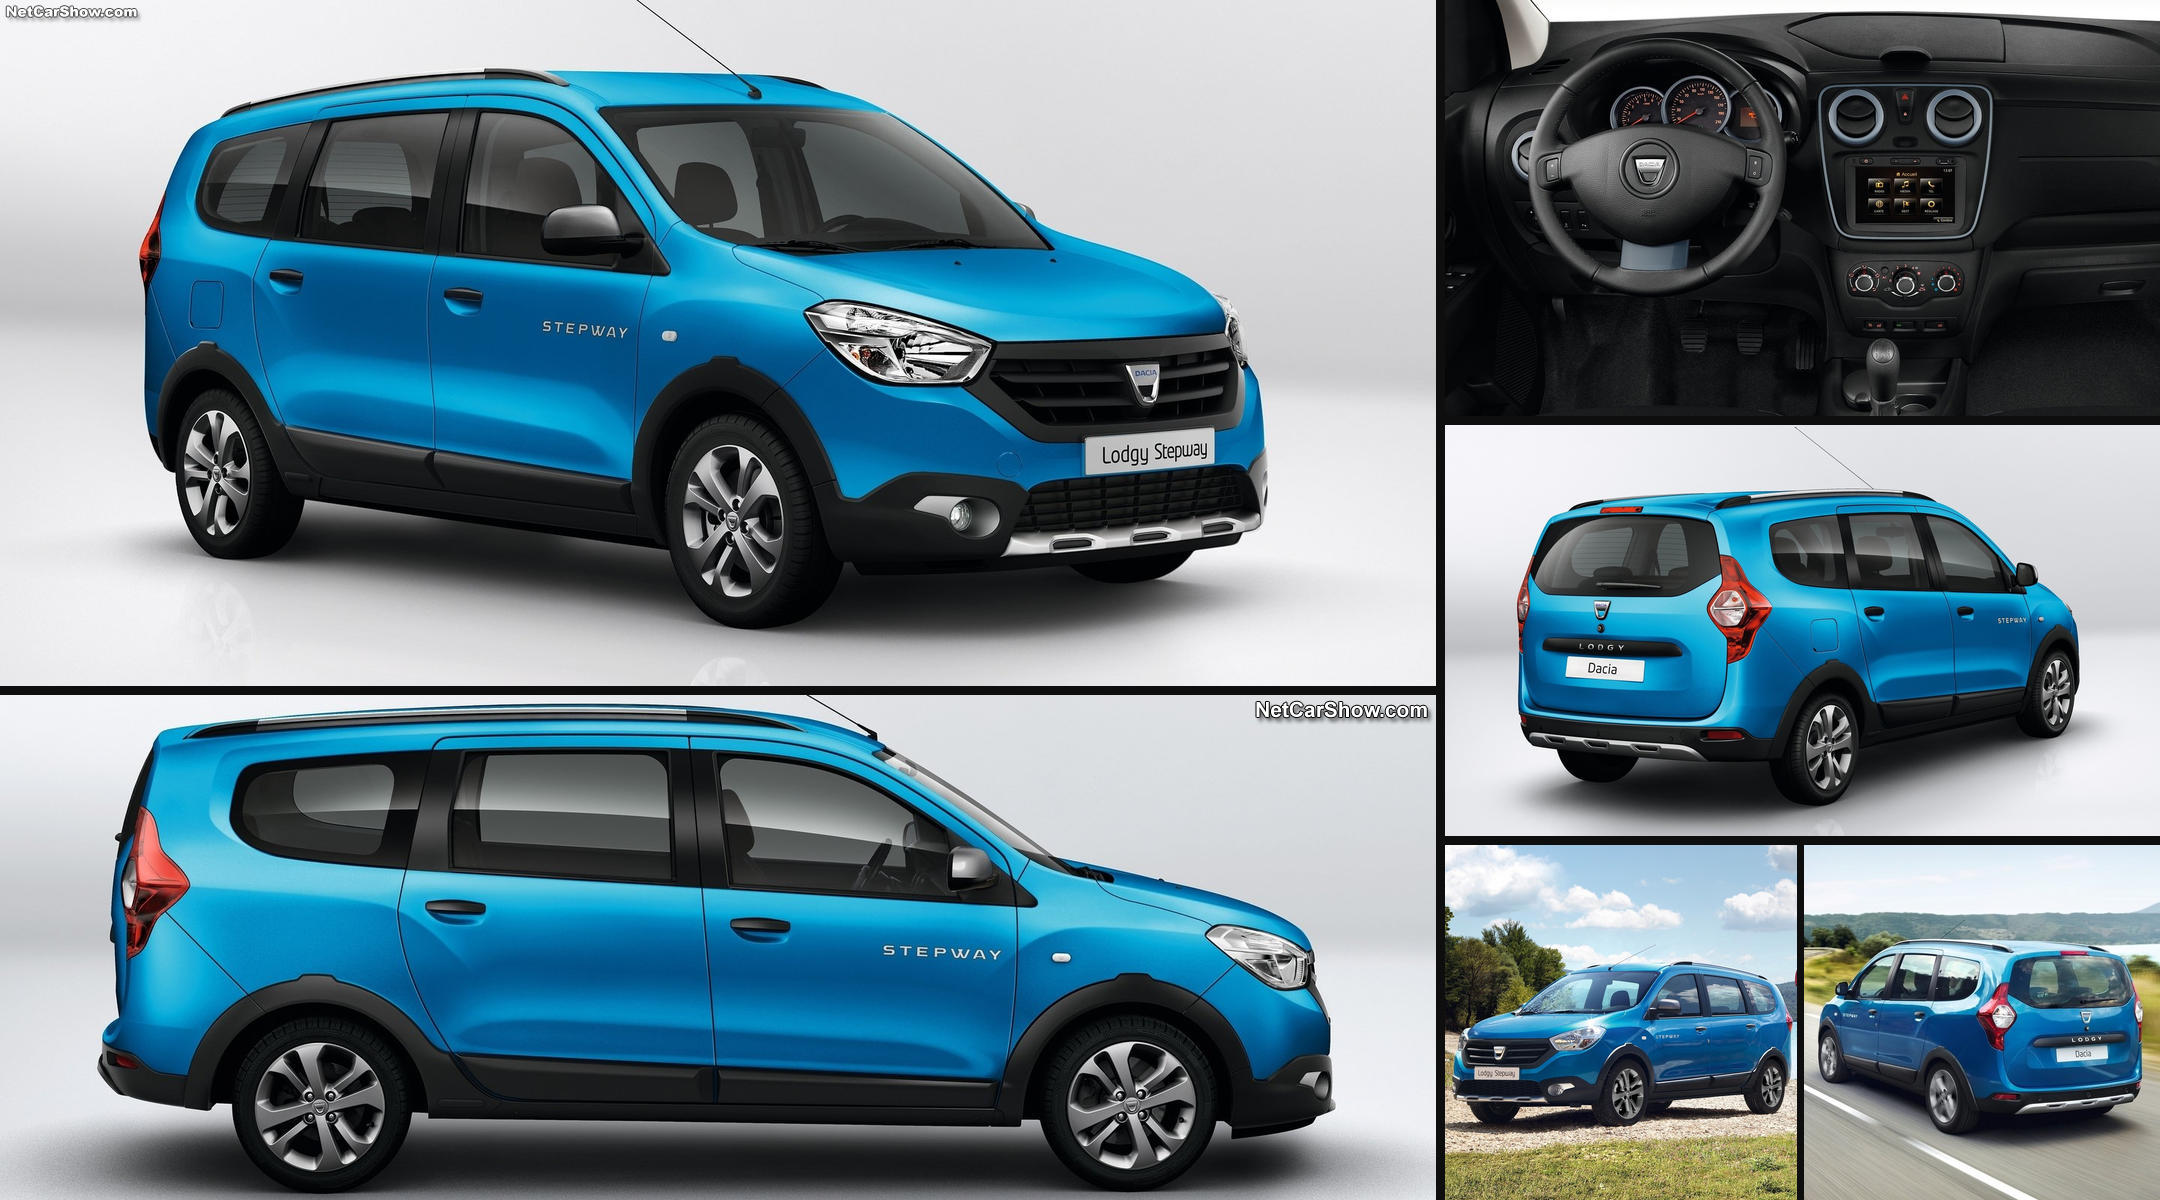 Renault Lodgy Stepway Range Launched in India, Price starting from 9.43 Lakh